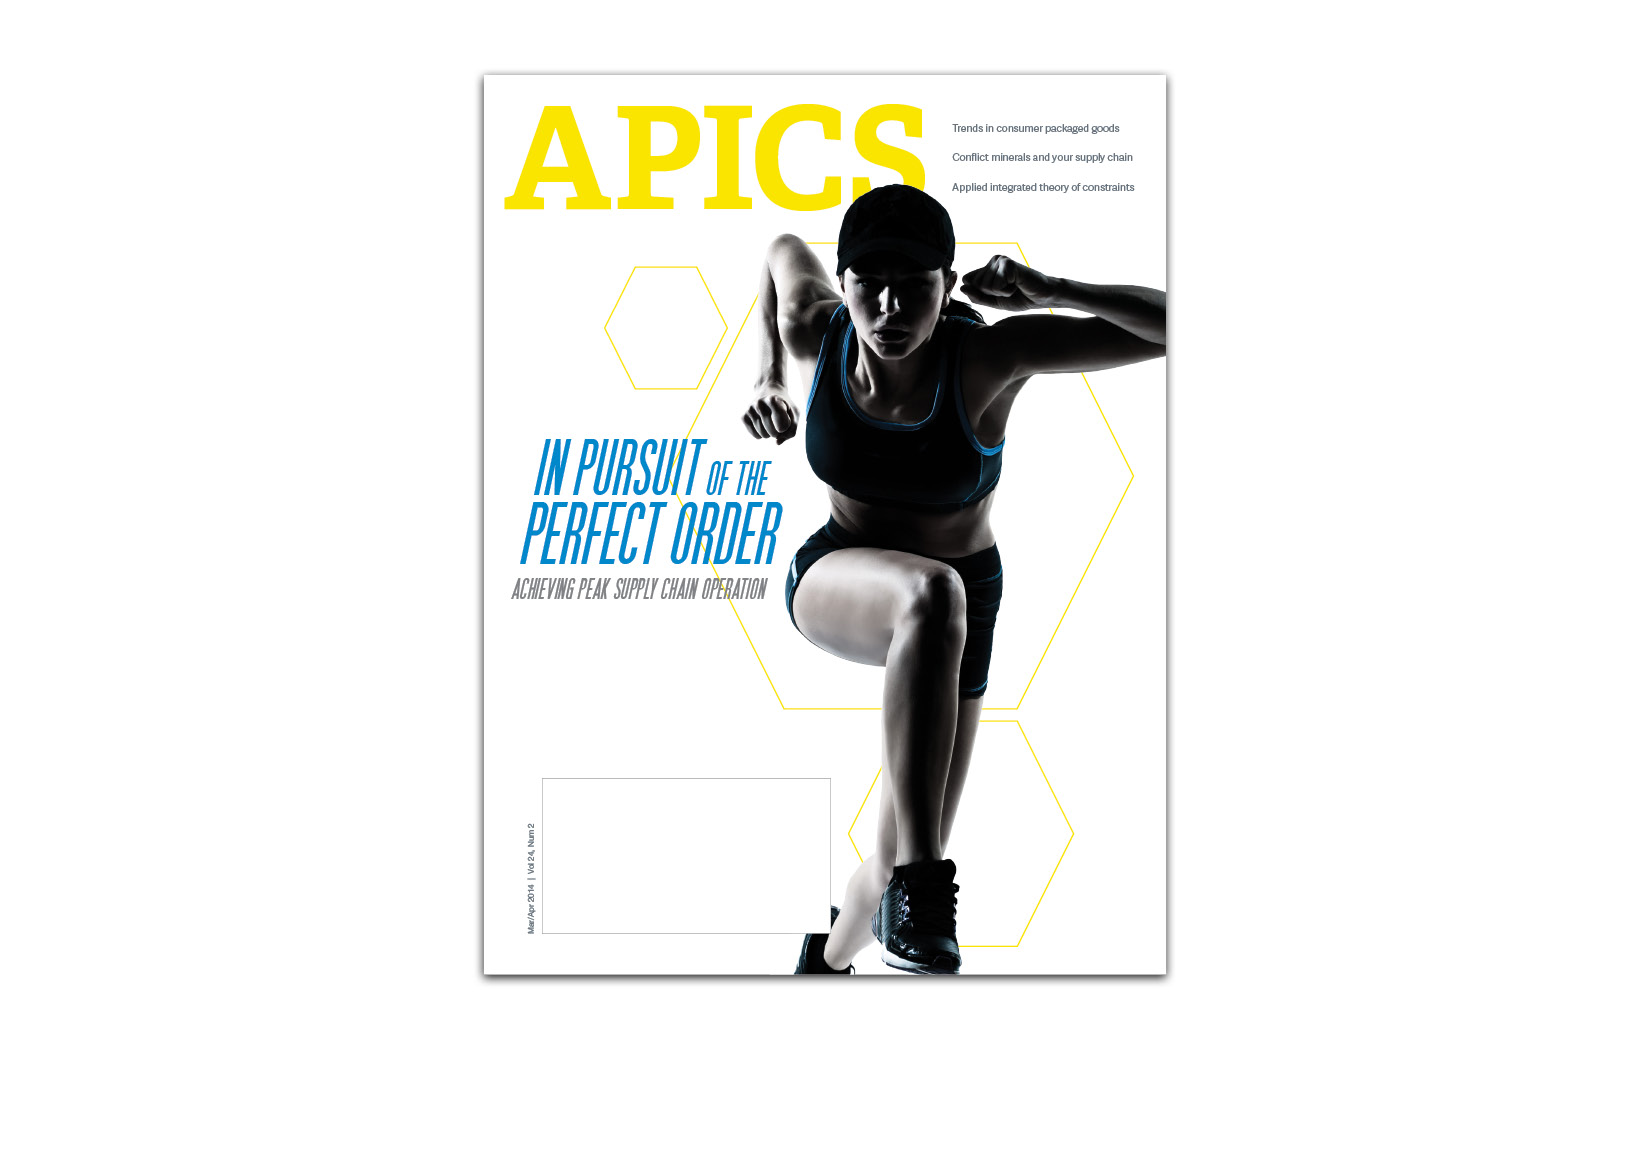  Cover for the March/April 2014&nbsp; APICS &nbsp;magazine. 